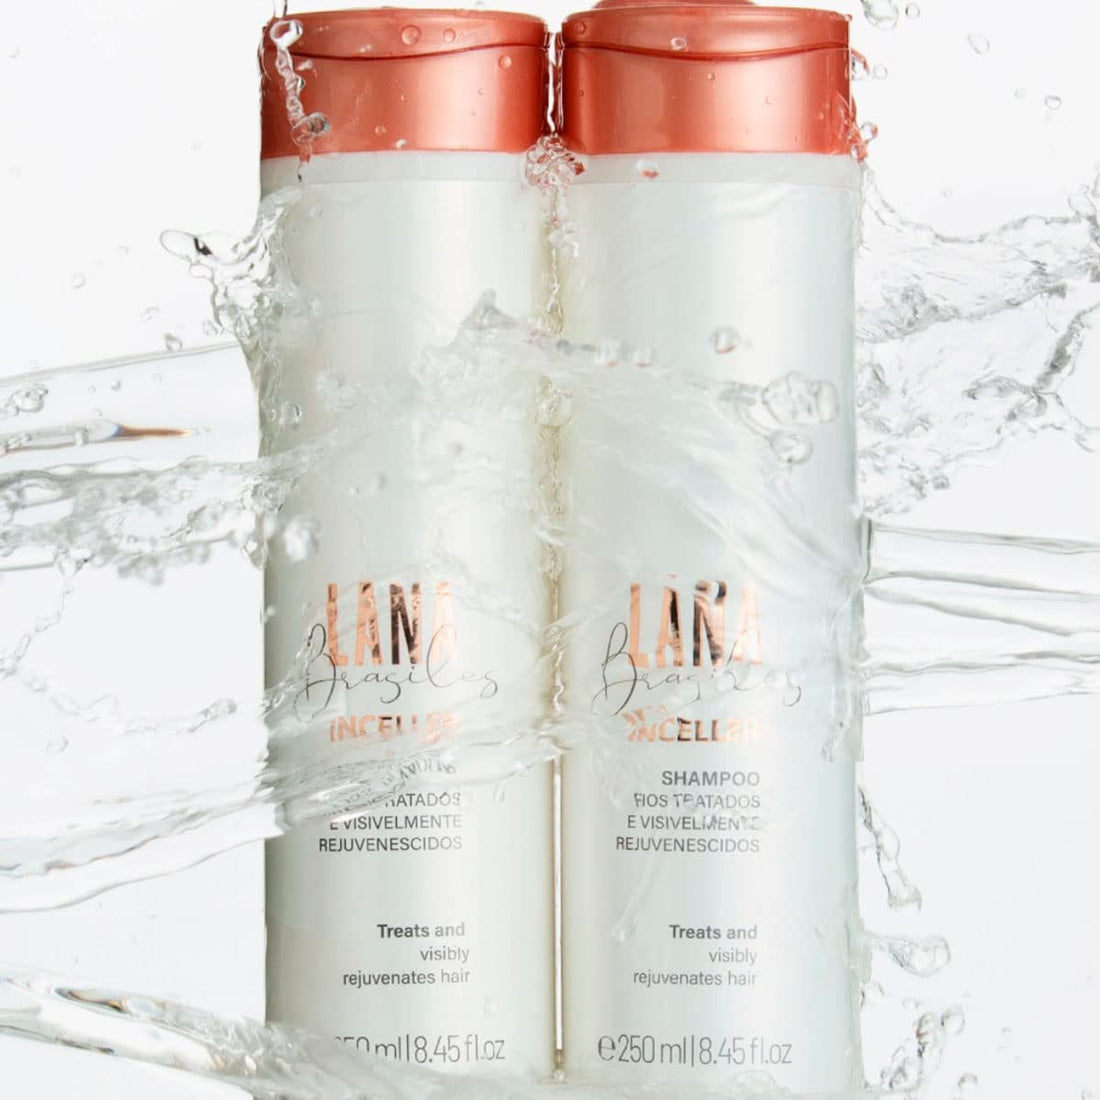 Lana Brasiles | Inceller Shampoo And Conditioner Duo | Treated And Visibly Rejuvenated Hair | (2x) 250 ml / 8.45 fl.oz. (Set of 2)